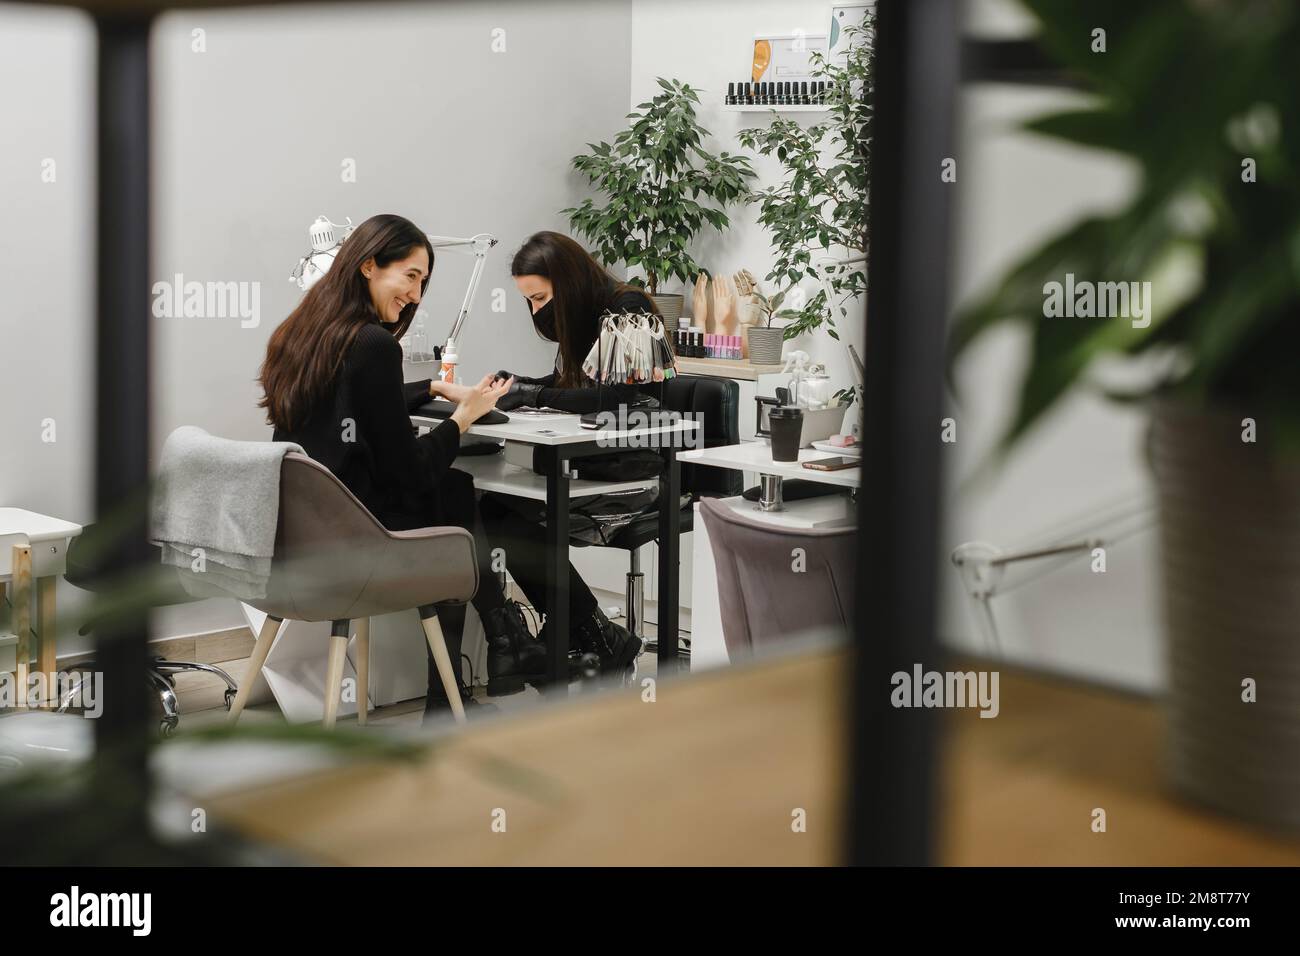 Nail service. Happy customer getting her nails done at beauty salon. Manicure specialist wearing protective mask doing nails for woman client in Stock Photo